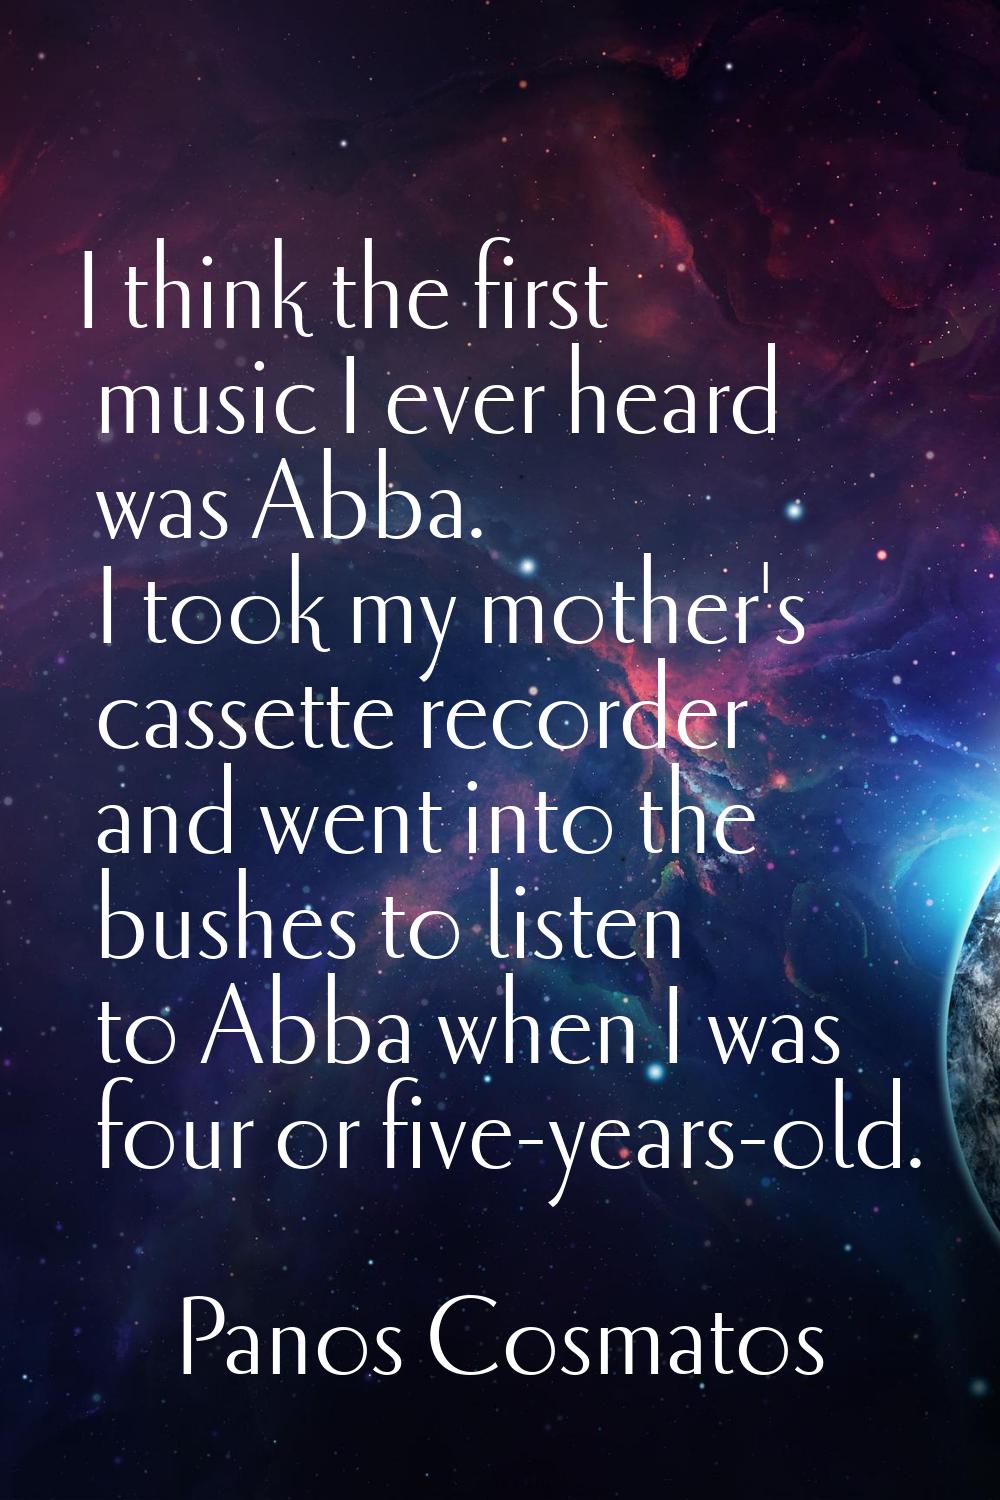 I think the first music I ever heard was Abba. I took my mother's cassette recorder and went into t